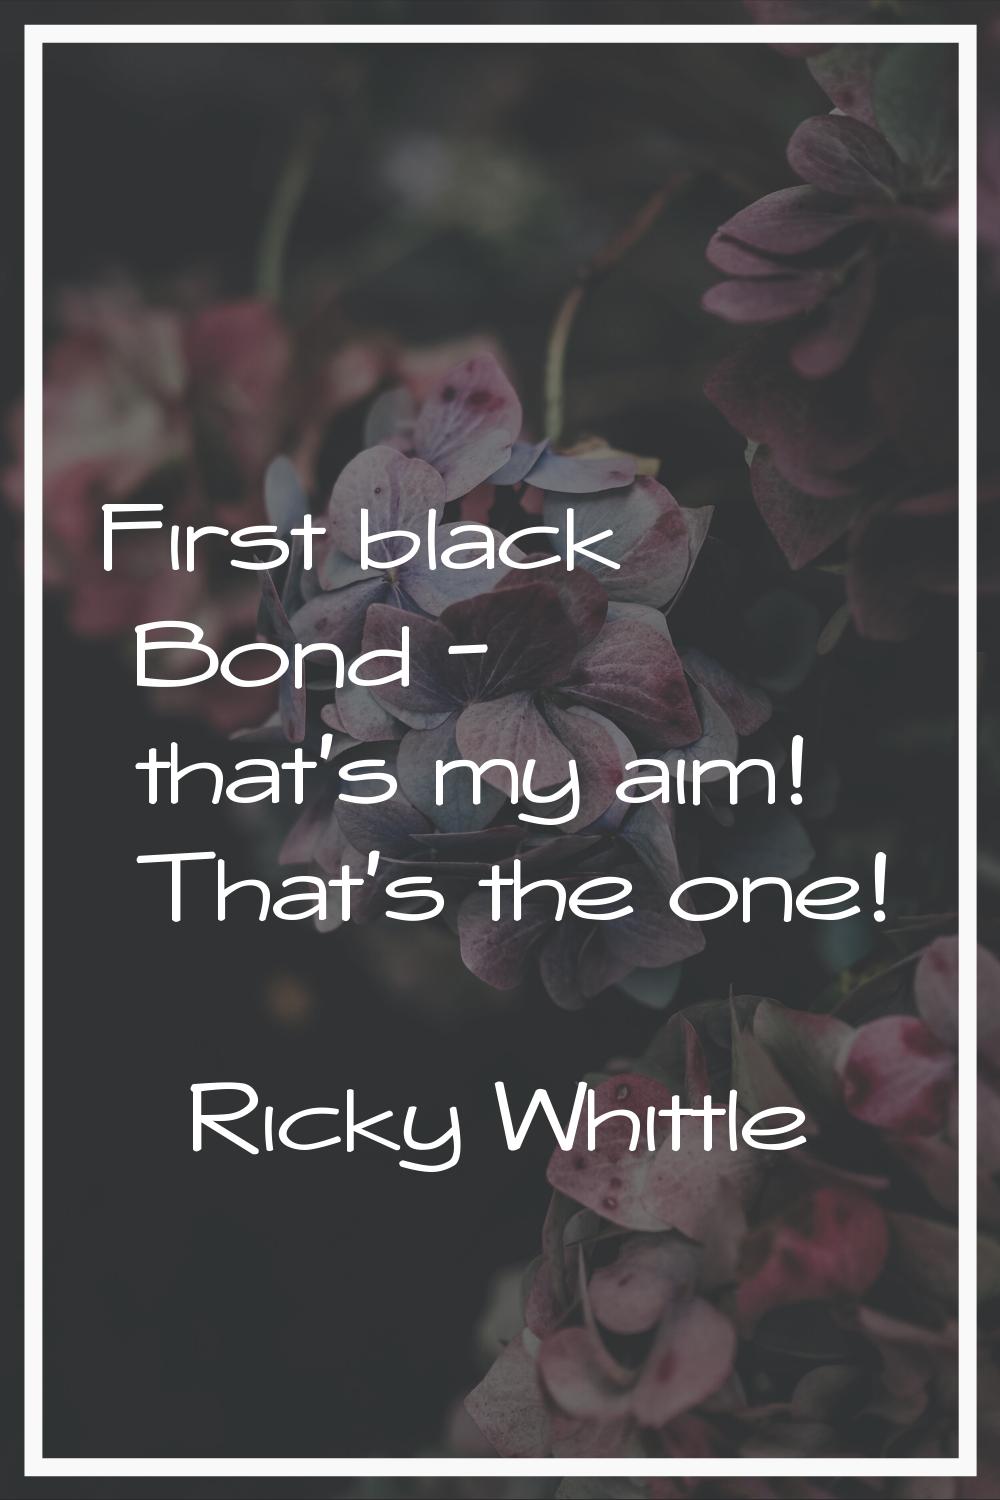 First black Bond - that's my aim! That's the one!